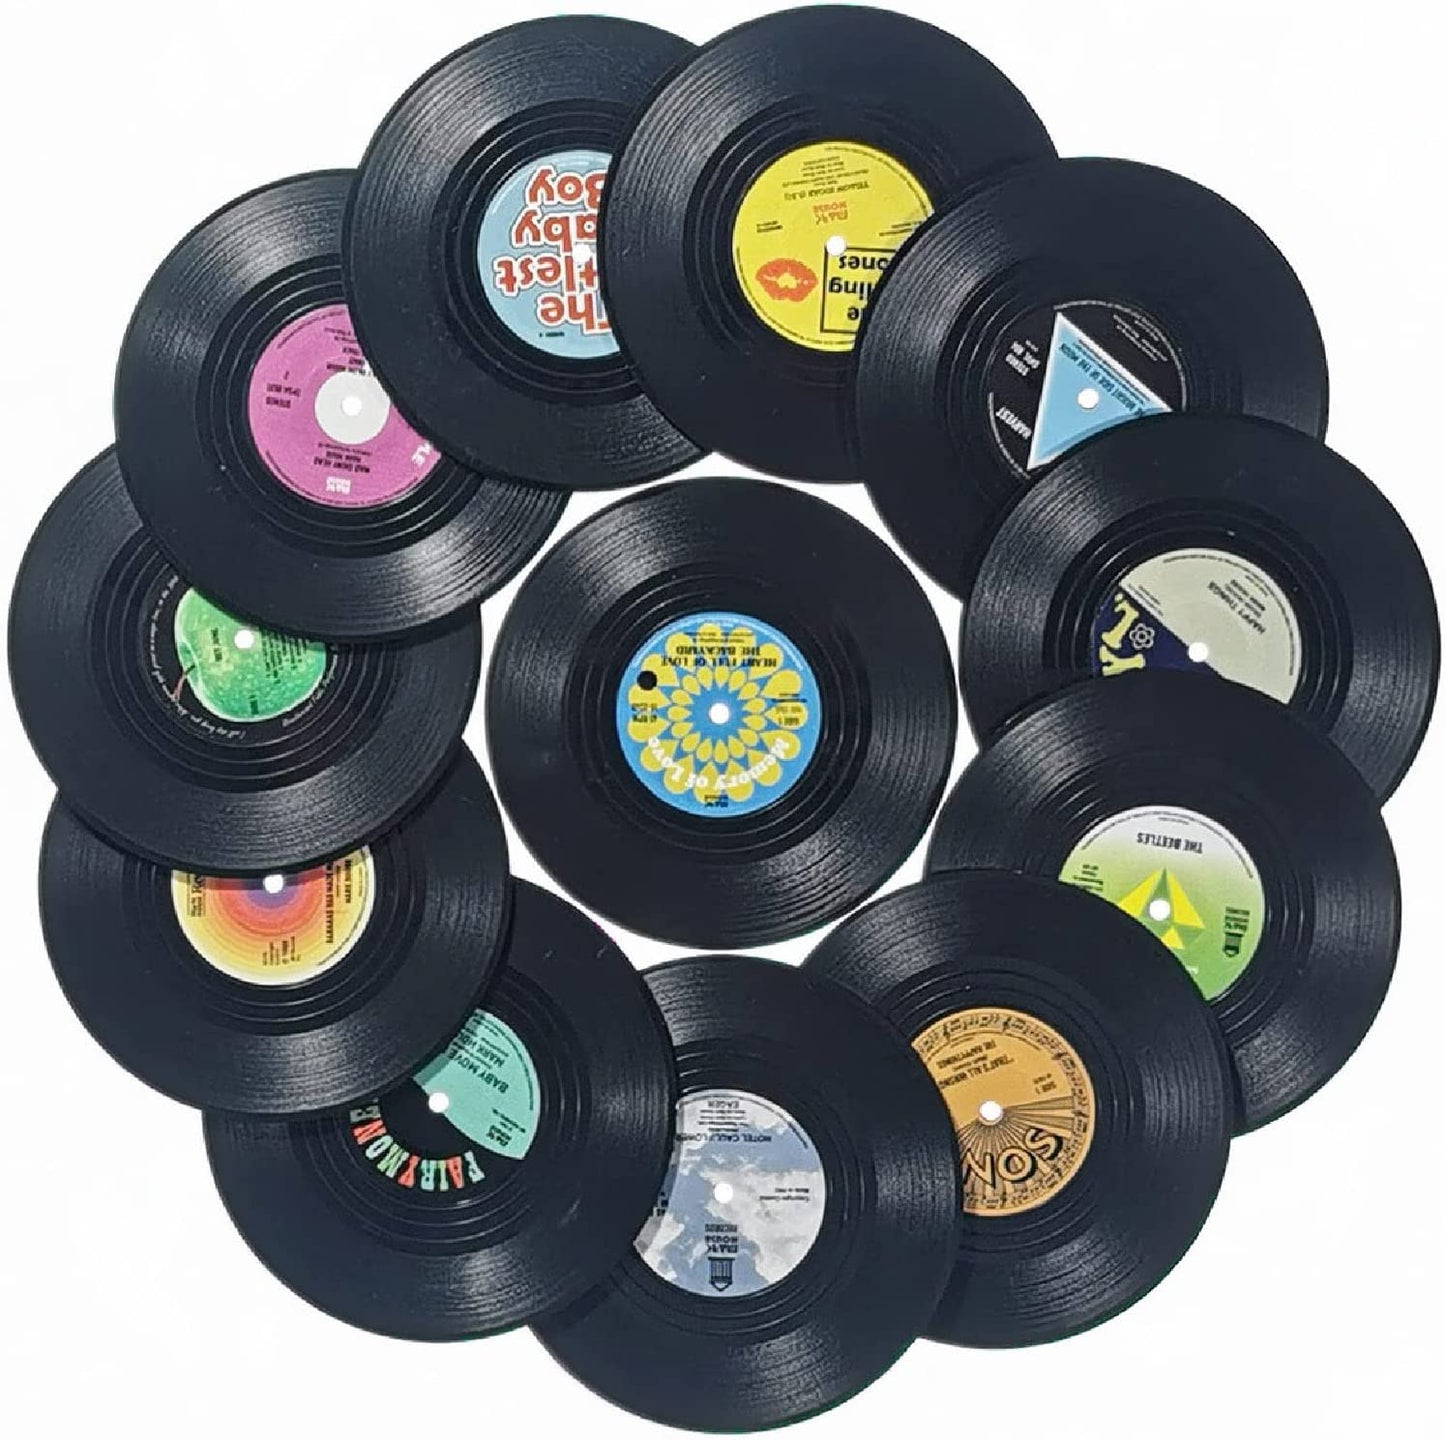 12PCS Vinyl Record Coasters for Drinks,Funny Bar Vintage Coasters Beer Coffee Tea Drinking Coaster,Suit for Home Bar Party Music Decor Housewarming Hostess Gifts(12PCS)